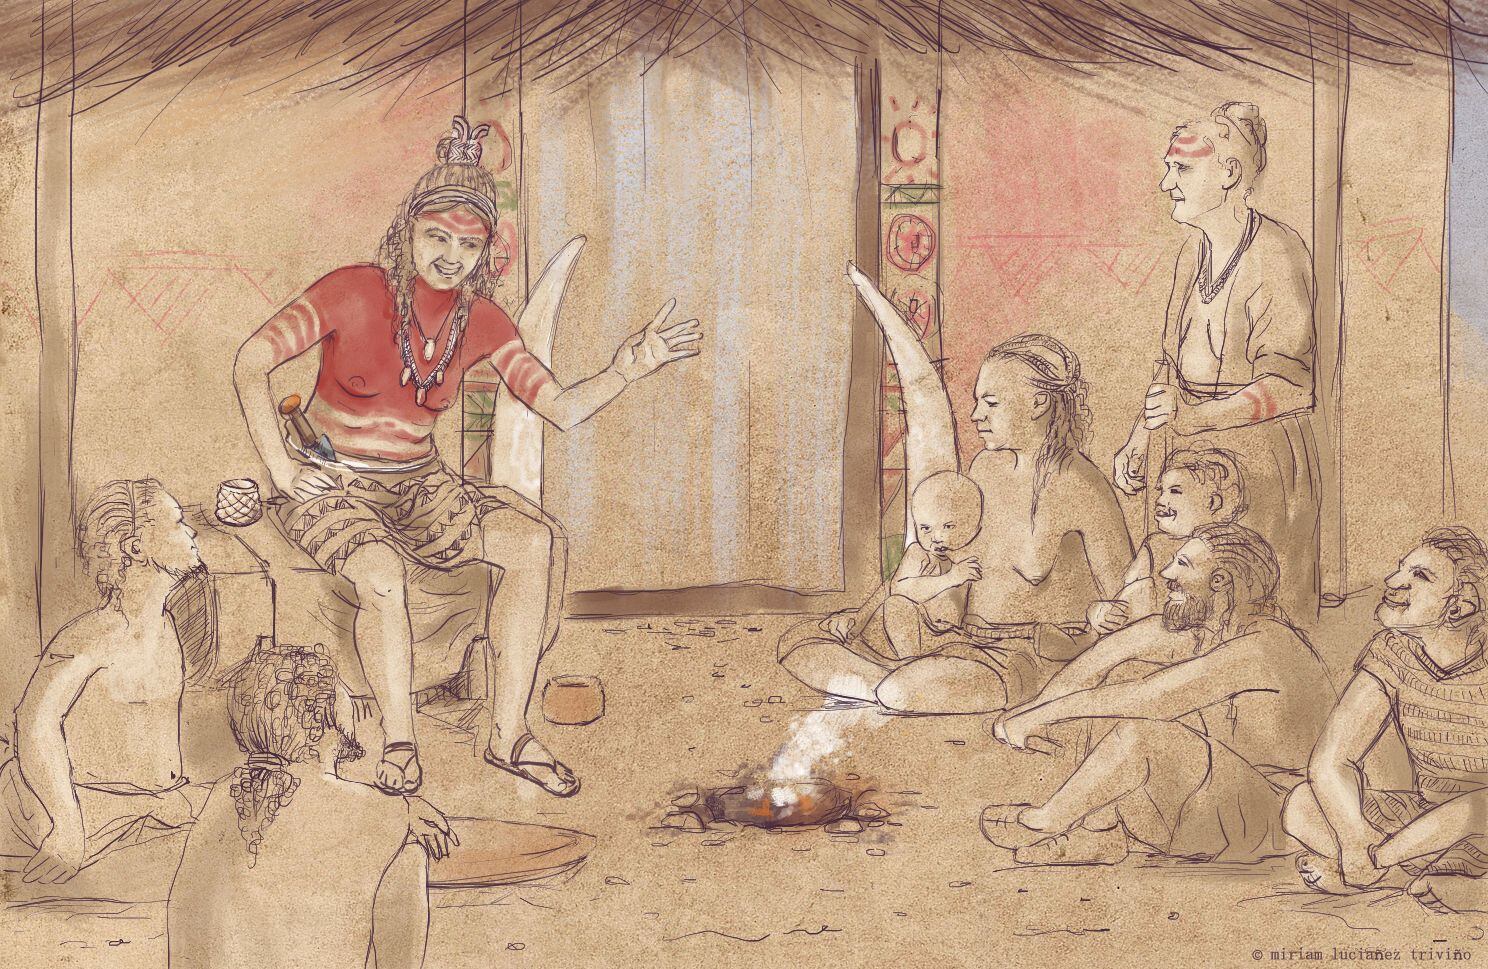 Interpretive illustration depicting the Ivory Lady speaking to a group of people.